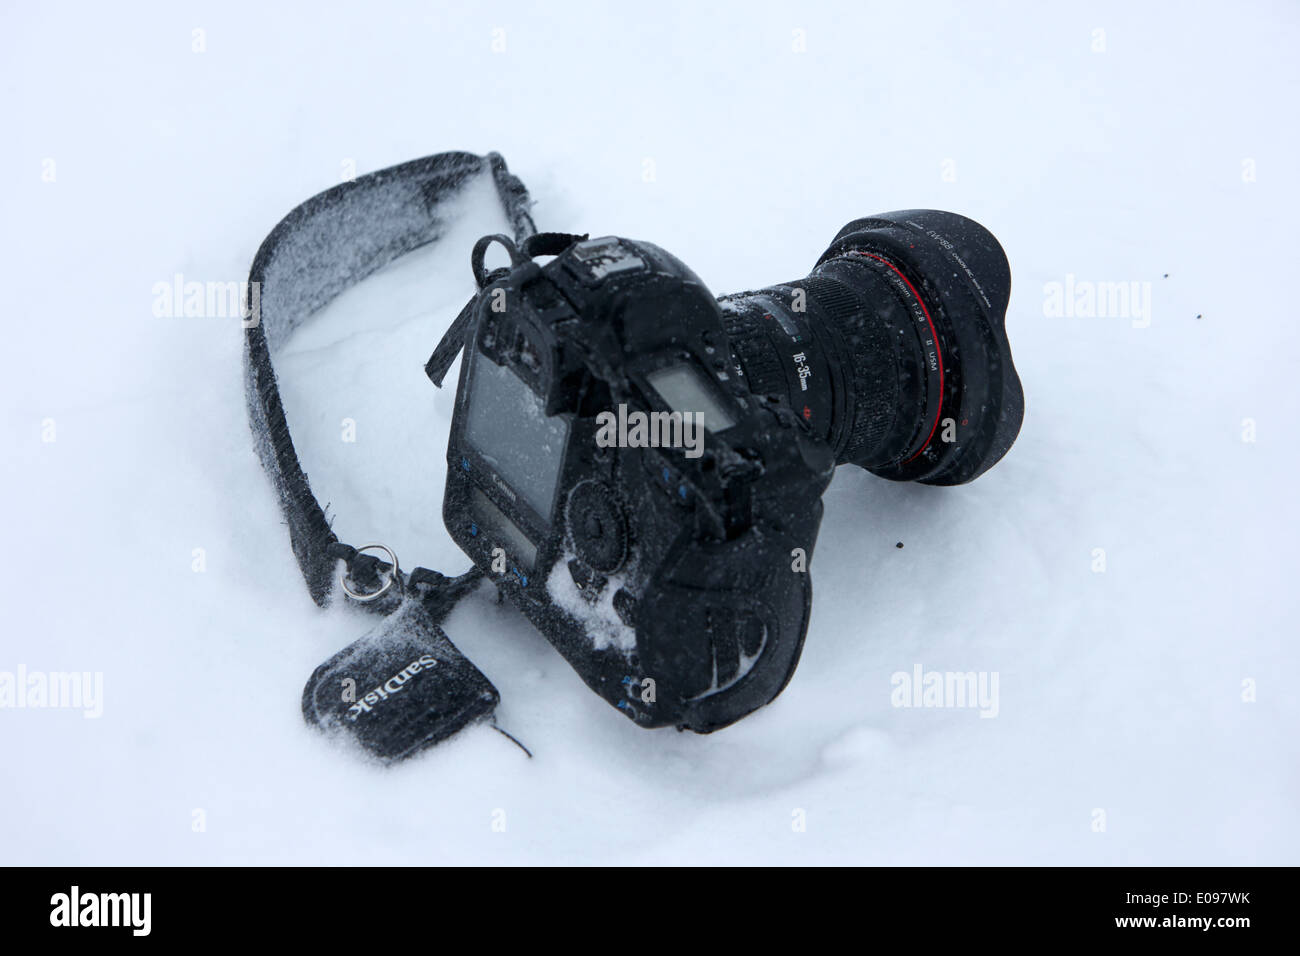 canon 1dsmk3 camera with 16-35 mk2 lens and sandisk cards owned by photographer Joe Fox getting buried in the snow antarctica Stock Photo